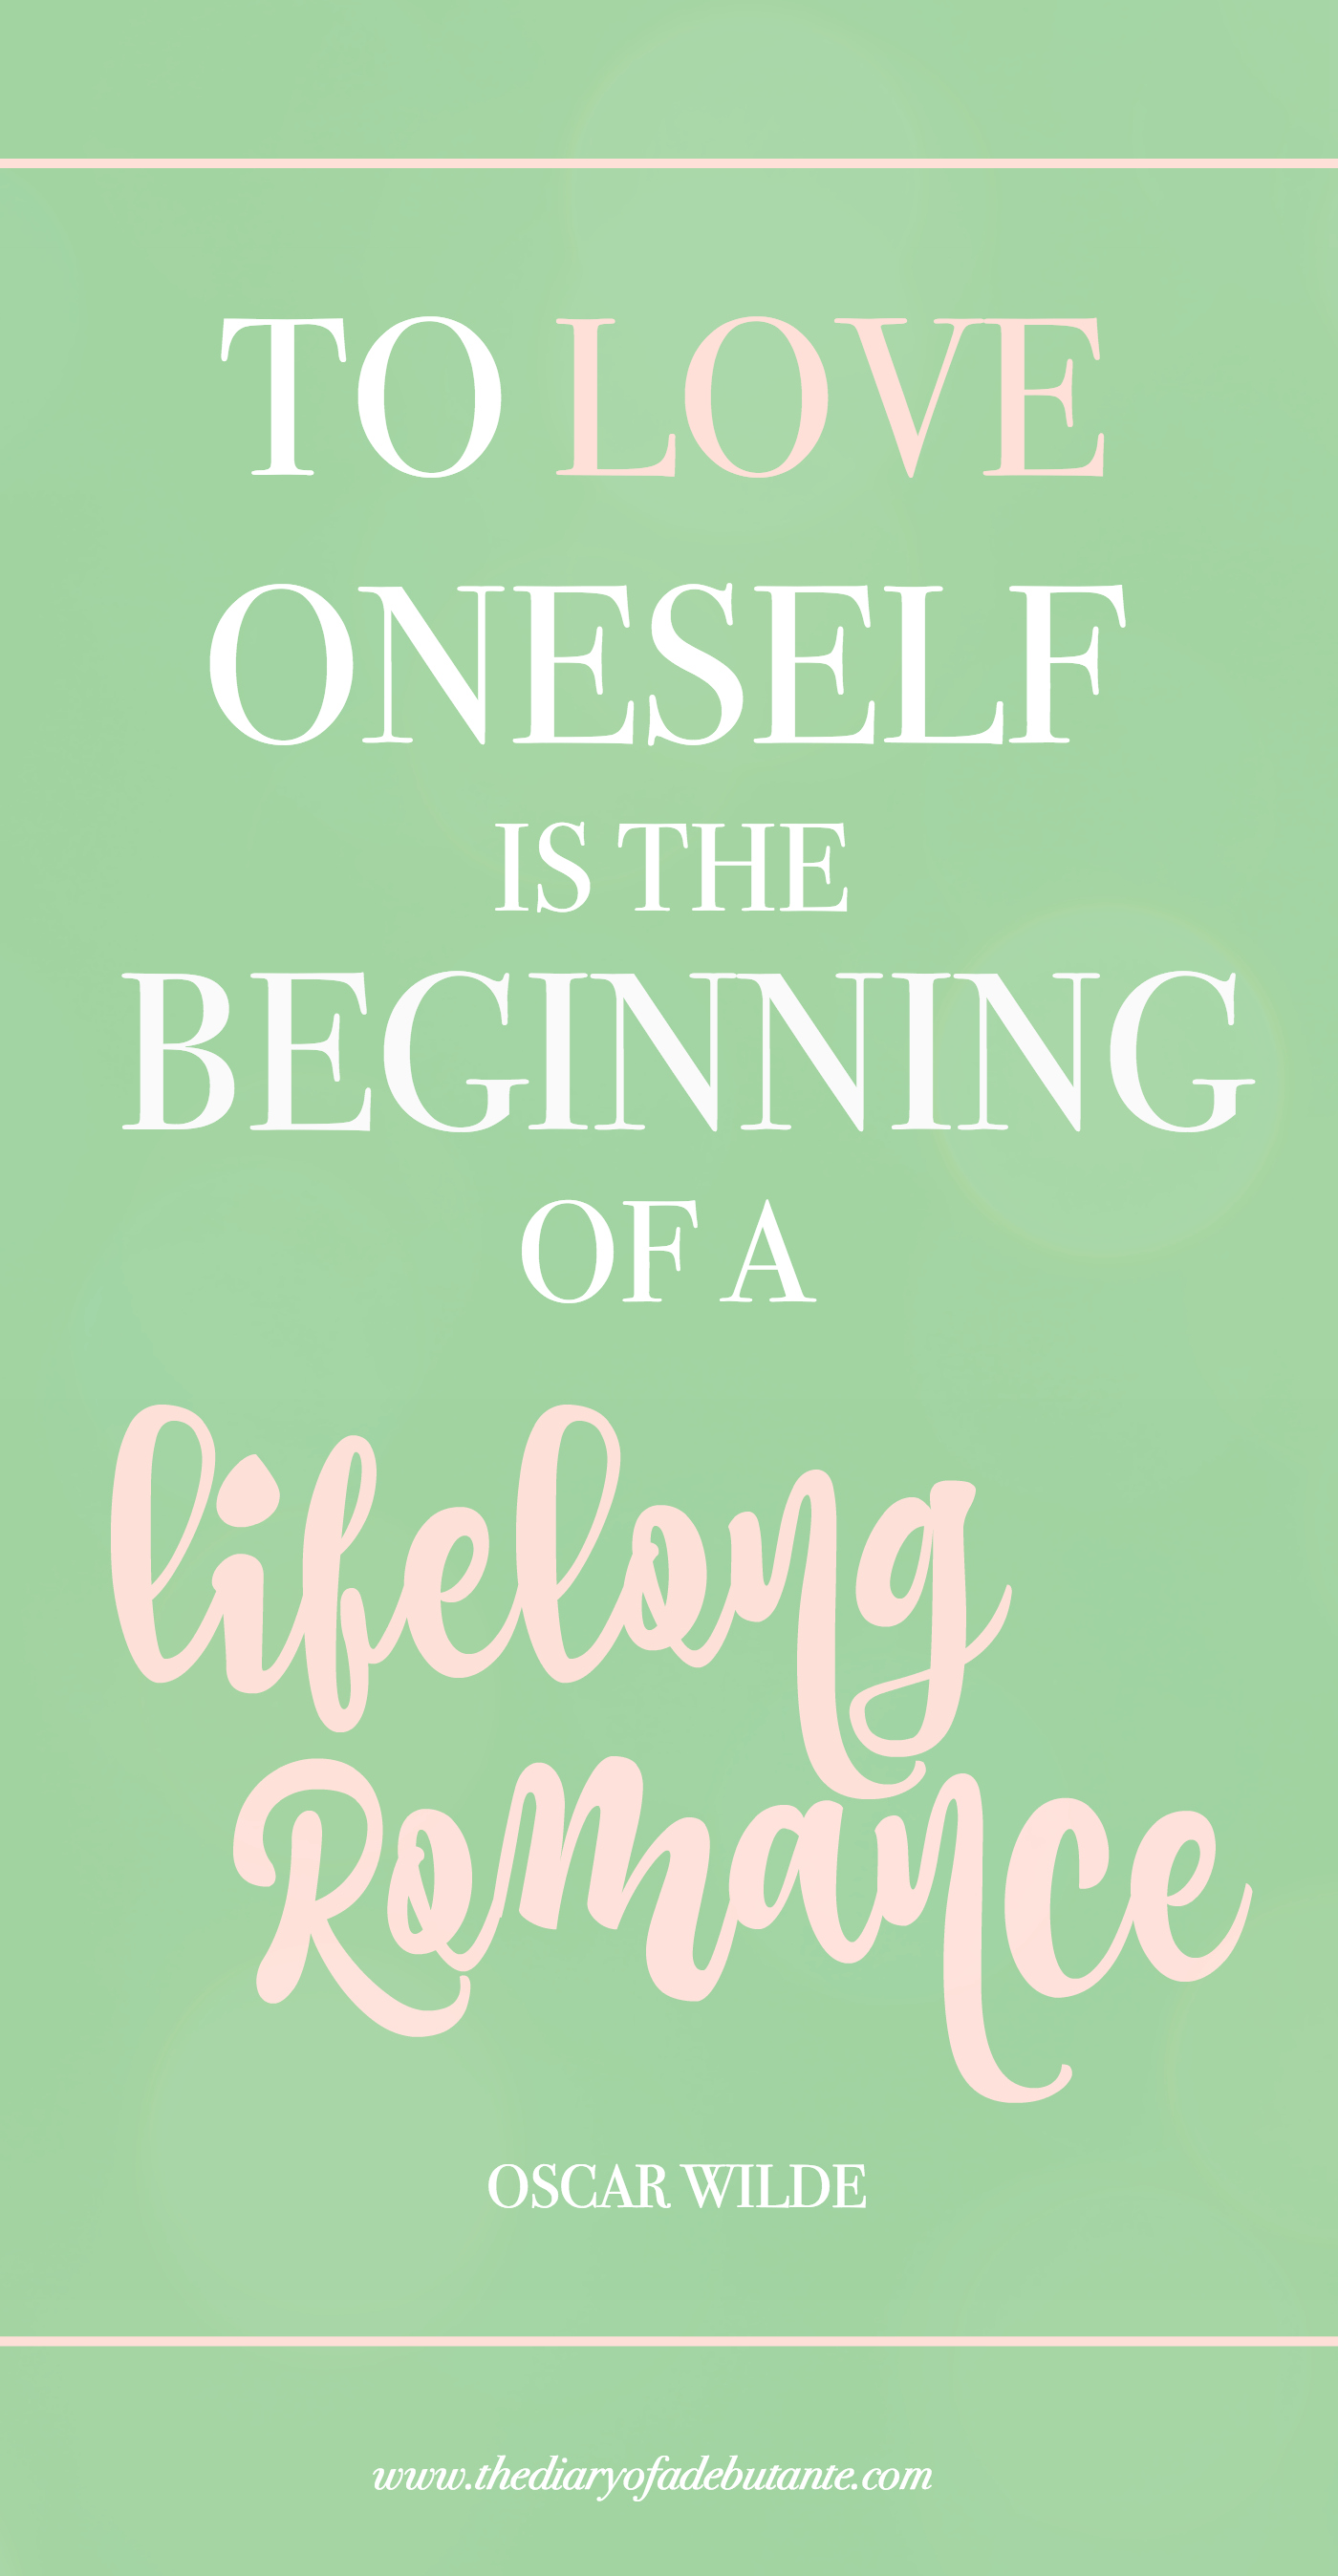 "To love oneself is the beginning of a lifelong romance." Wise words from Oscar Wilde | 25 simple ways to practice self-love on a daily basis | self-love techniques and holistic anxiety remedies | Treat Yo' Self: 25 Ways to Practice Self-Love by blogger and eating disorder survivor Stephanie Ziajka from Diary of a Debutante